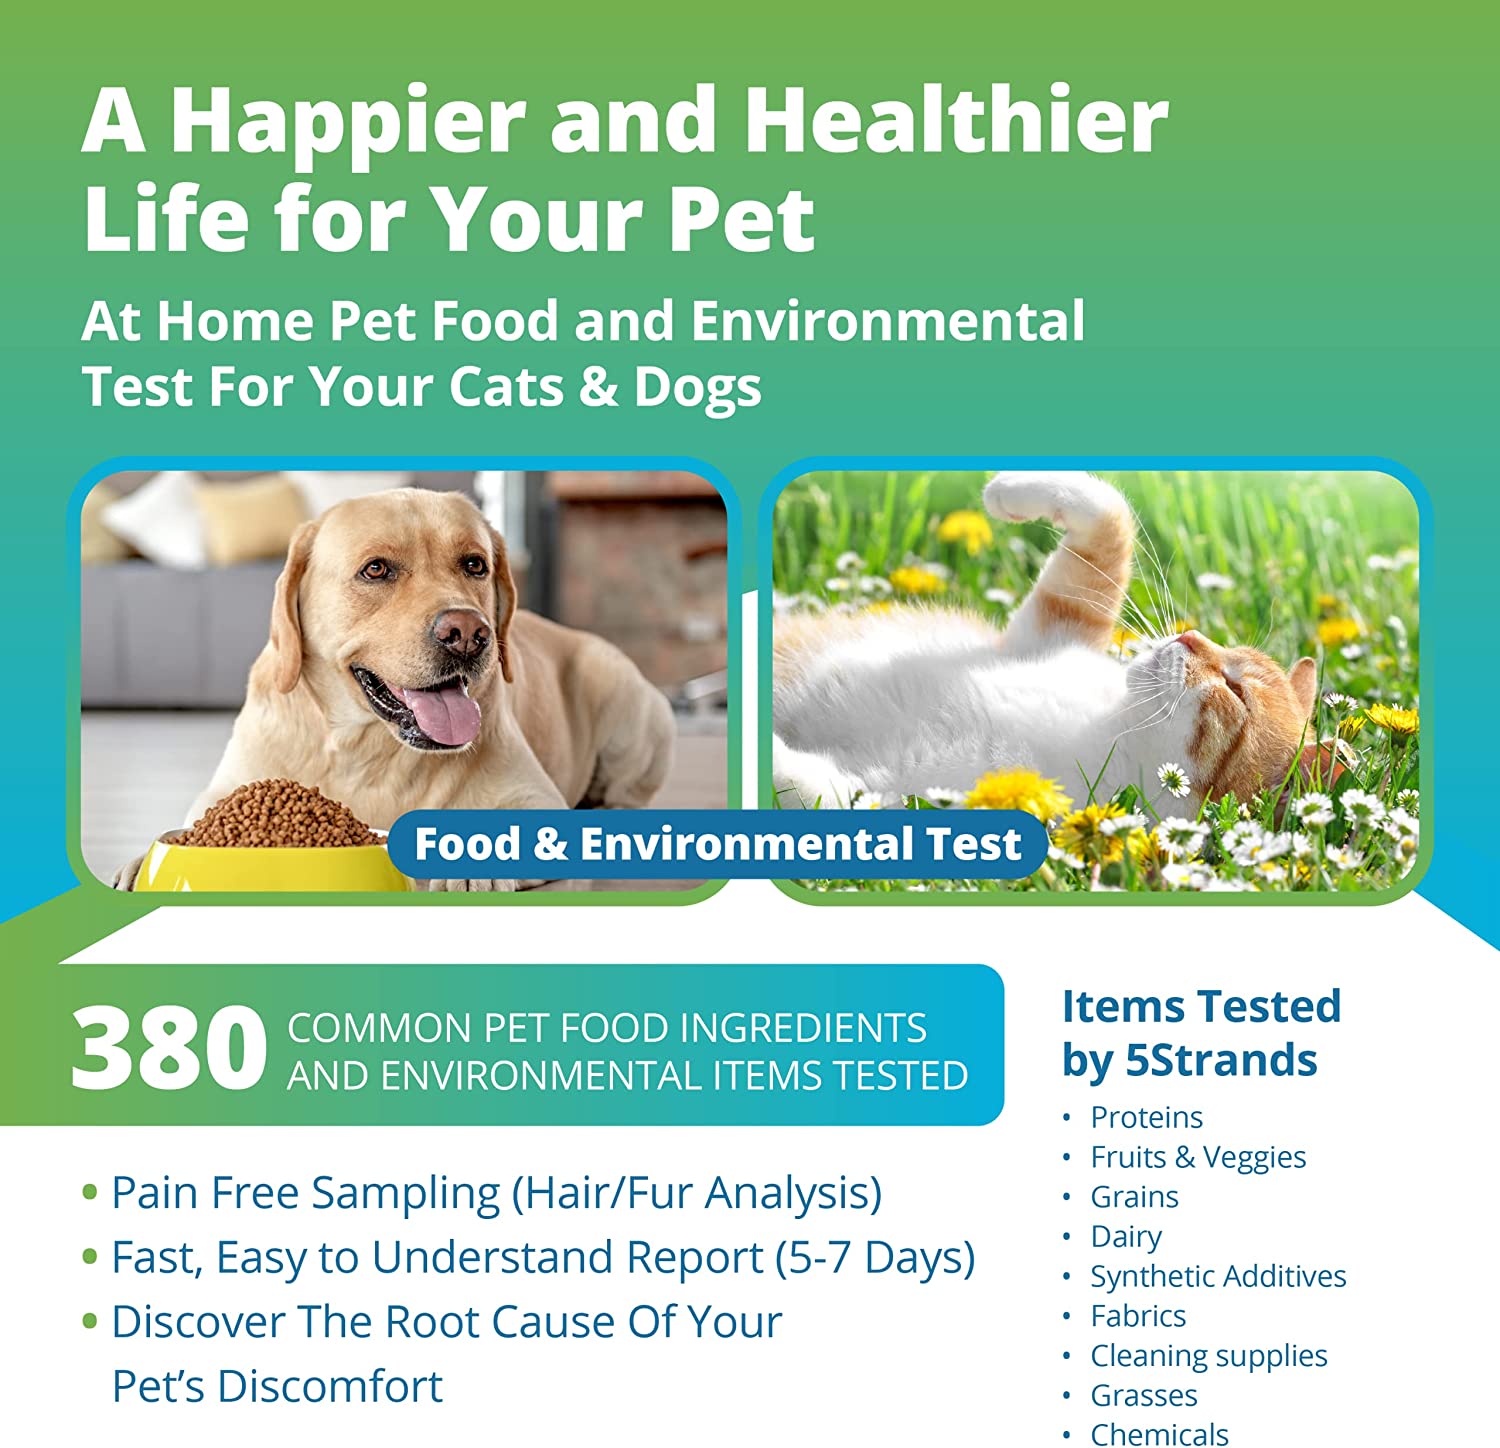 DNA Test Kits For Dogs - Buying Guide - 5Strand
